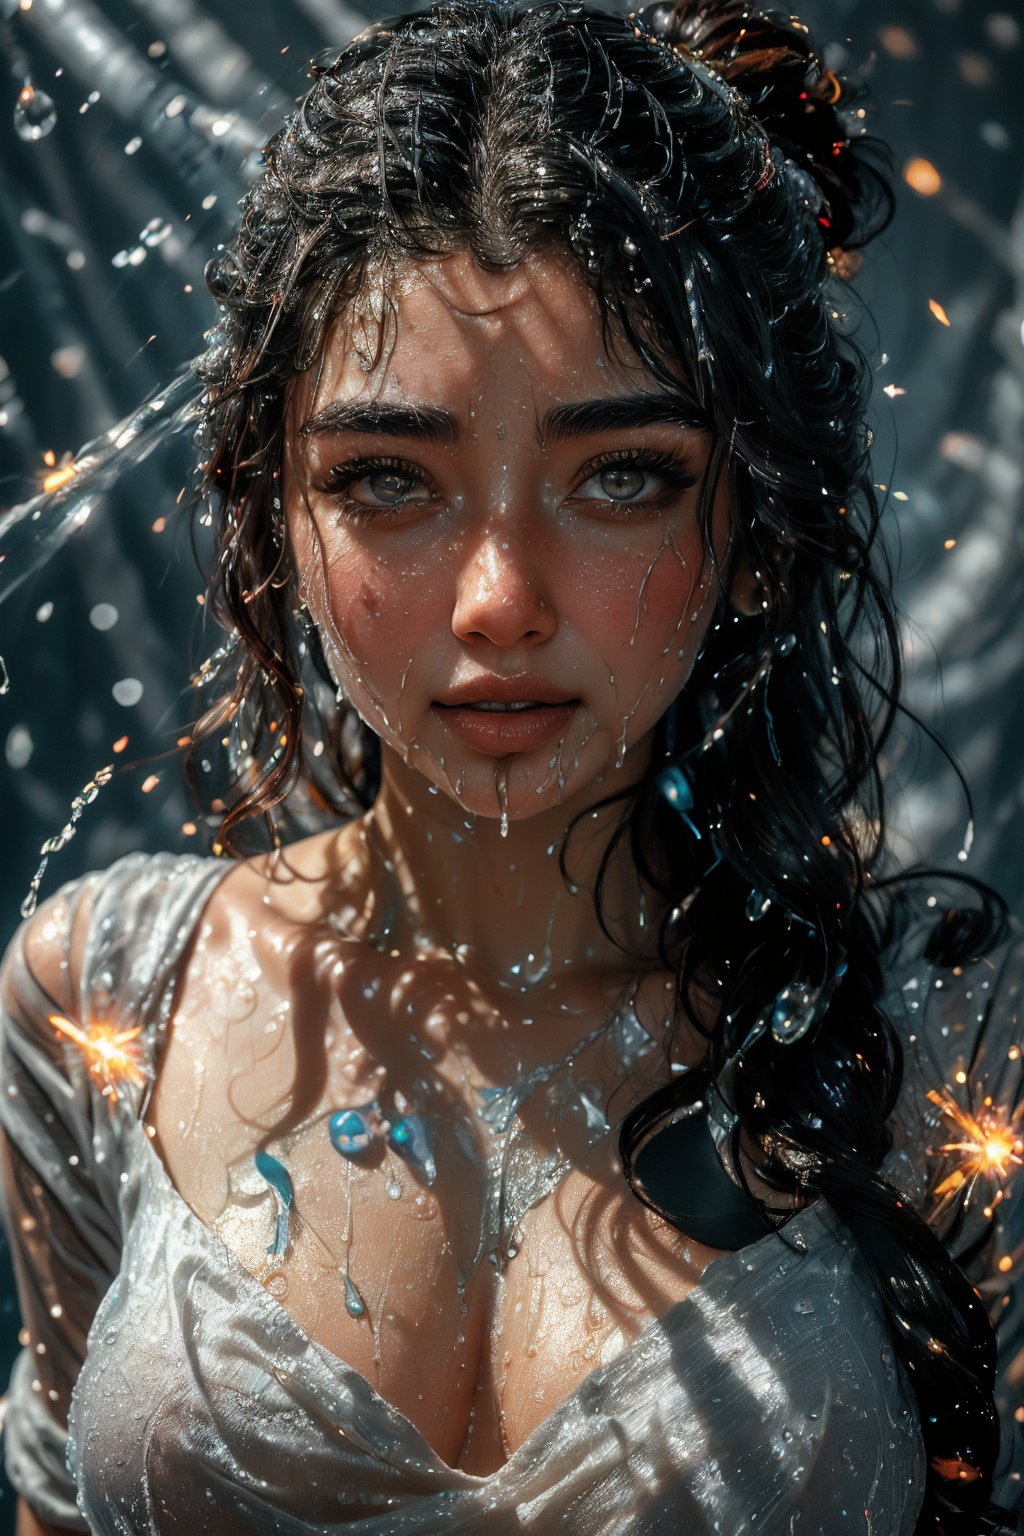 ((((Light particle, spark, motion light, water drops, wet)))), Curly hair, Raw photo of (25yo Beautiful young woman:1.1) (best quality, highres, ultra-detailed:1.2), vibrant colors, glowing dimond, glowing eyes, realistic Raw photo, realistic lighting, traditional Red saree,  exotic beauty, mesmerizing eyes, girl,slim fit,Curly hair women,freckles, Energy light particle mecha,Light partical & freckles,Mallu,photorealistic,Saree